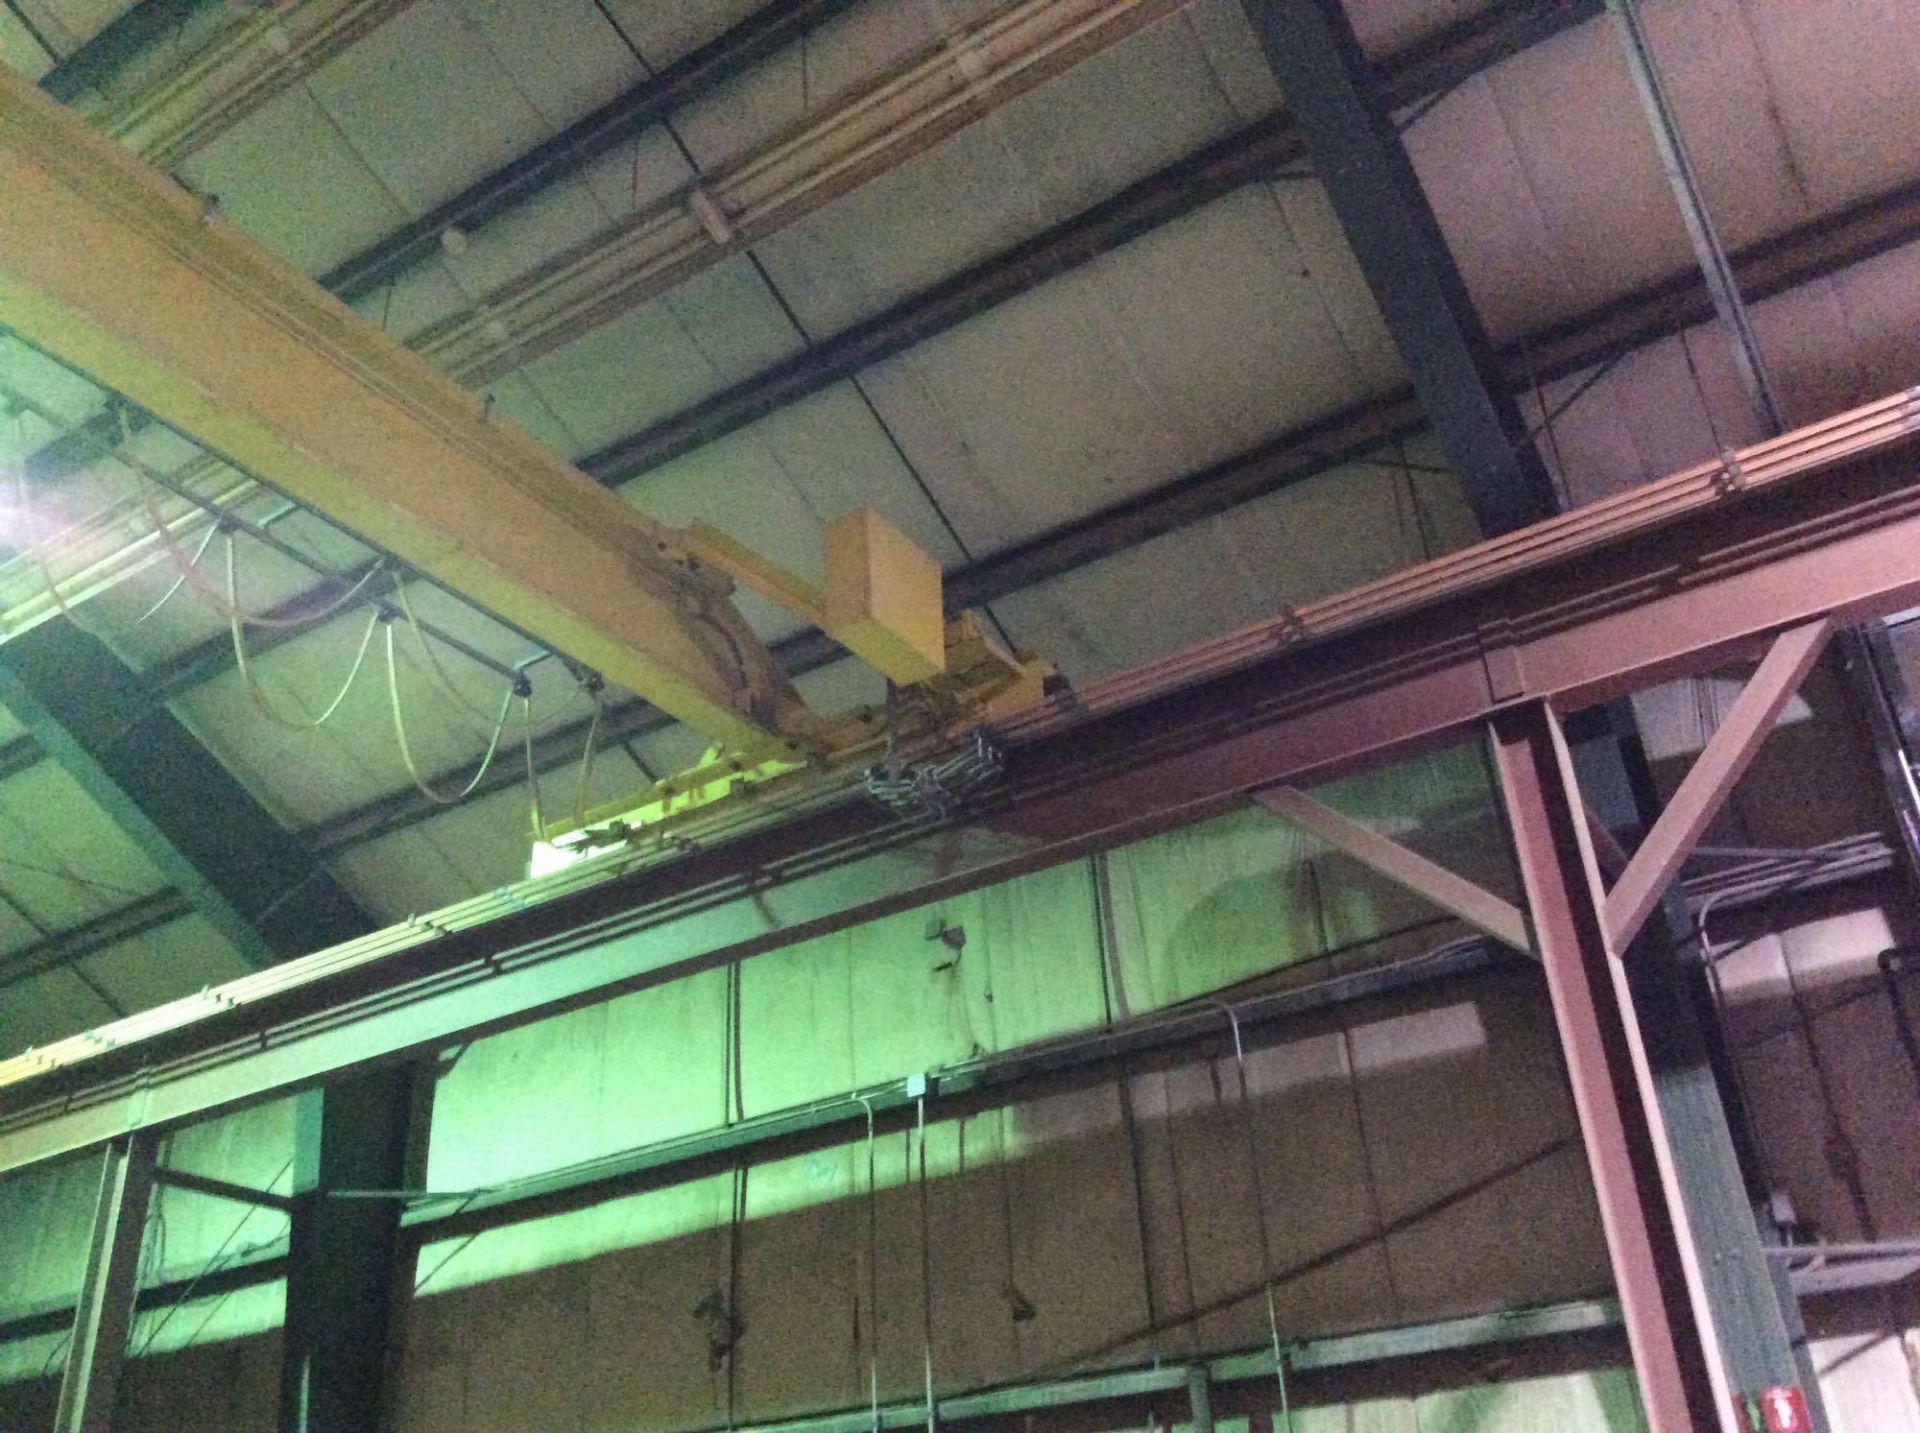 Rican 10-ton capacity overhead crane system with controls and support rails - Image 3 of 3